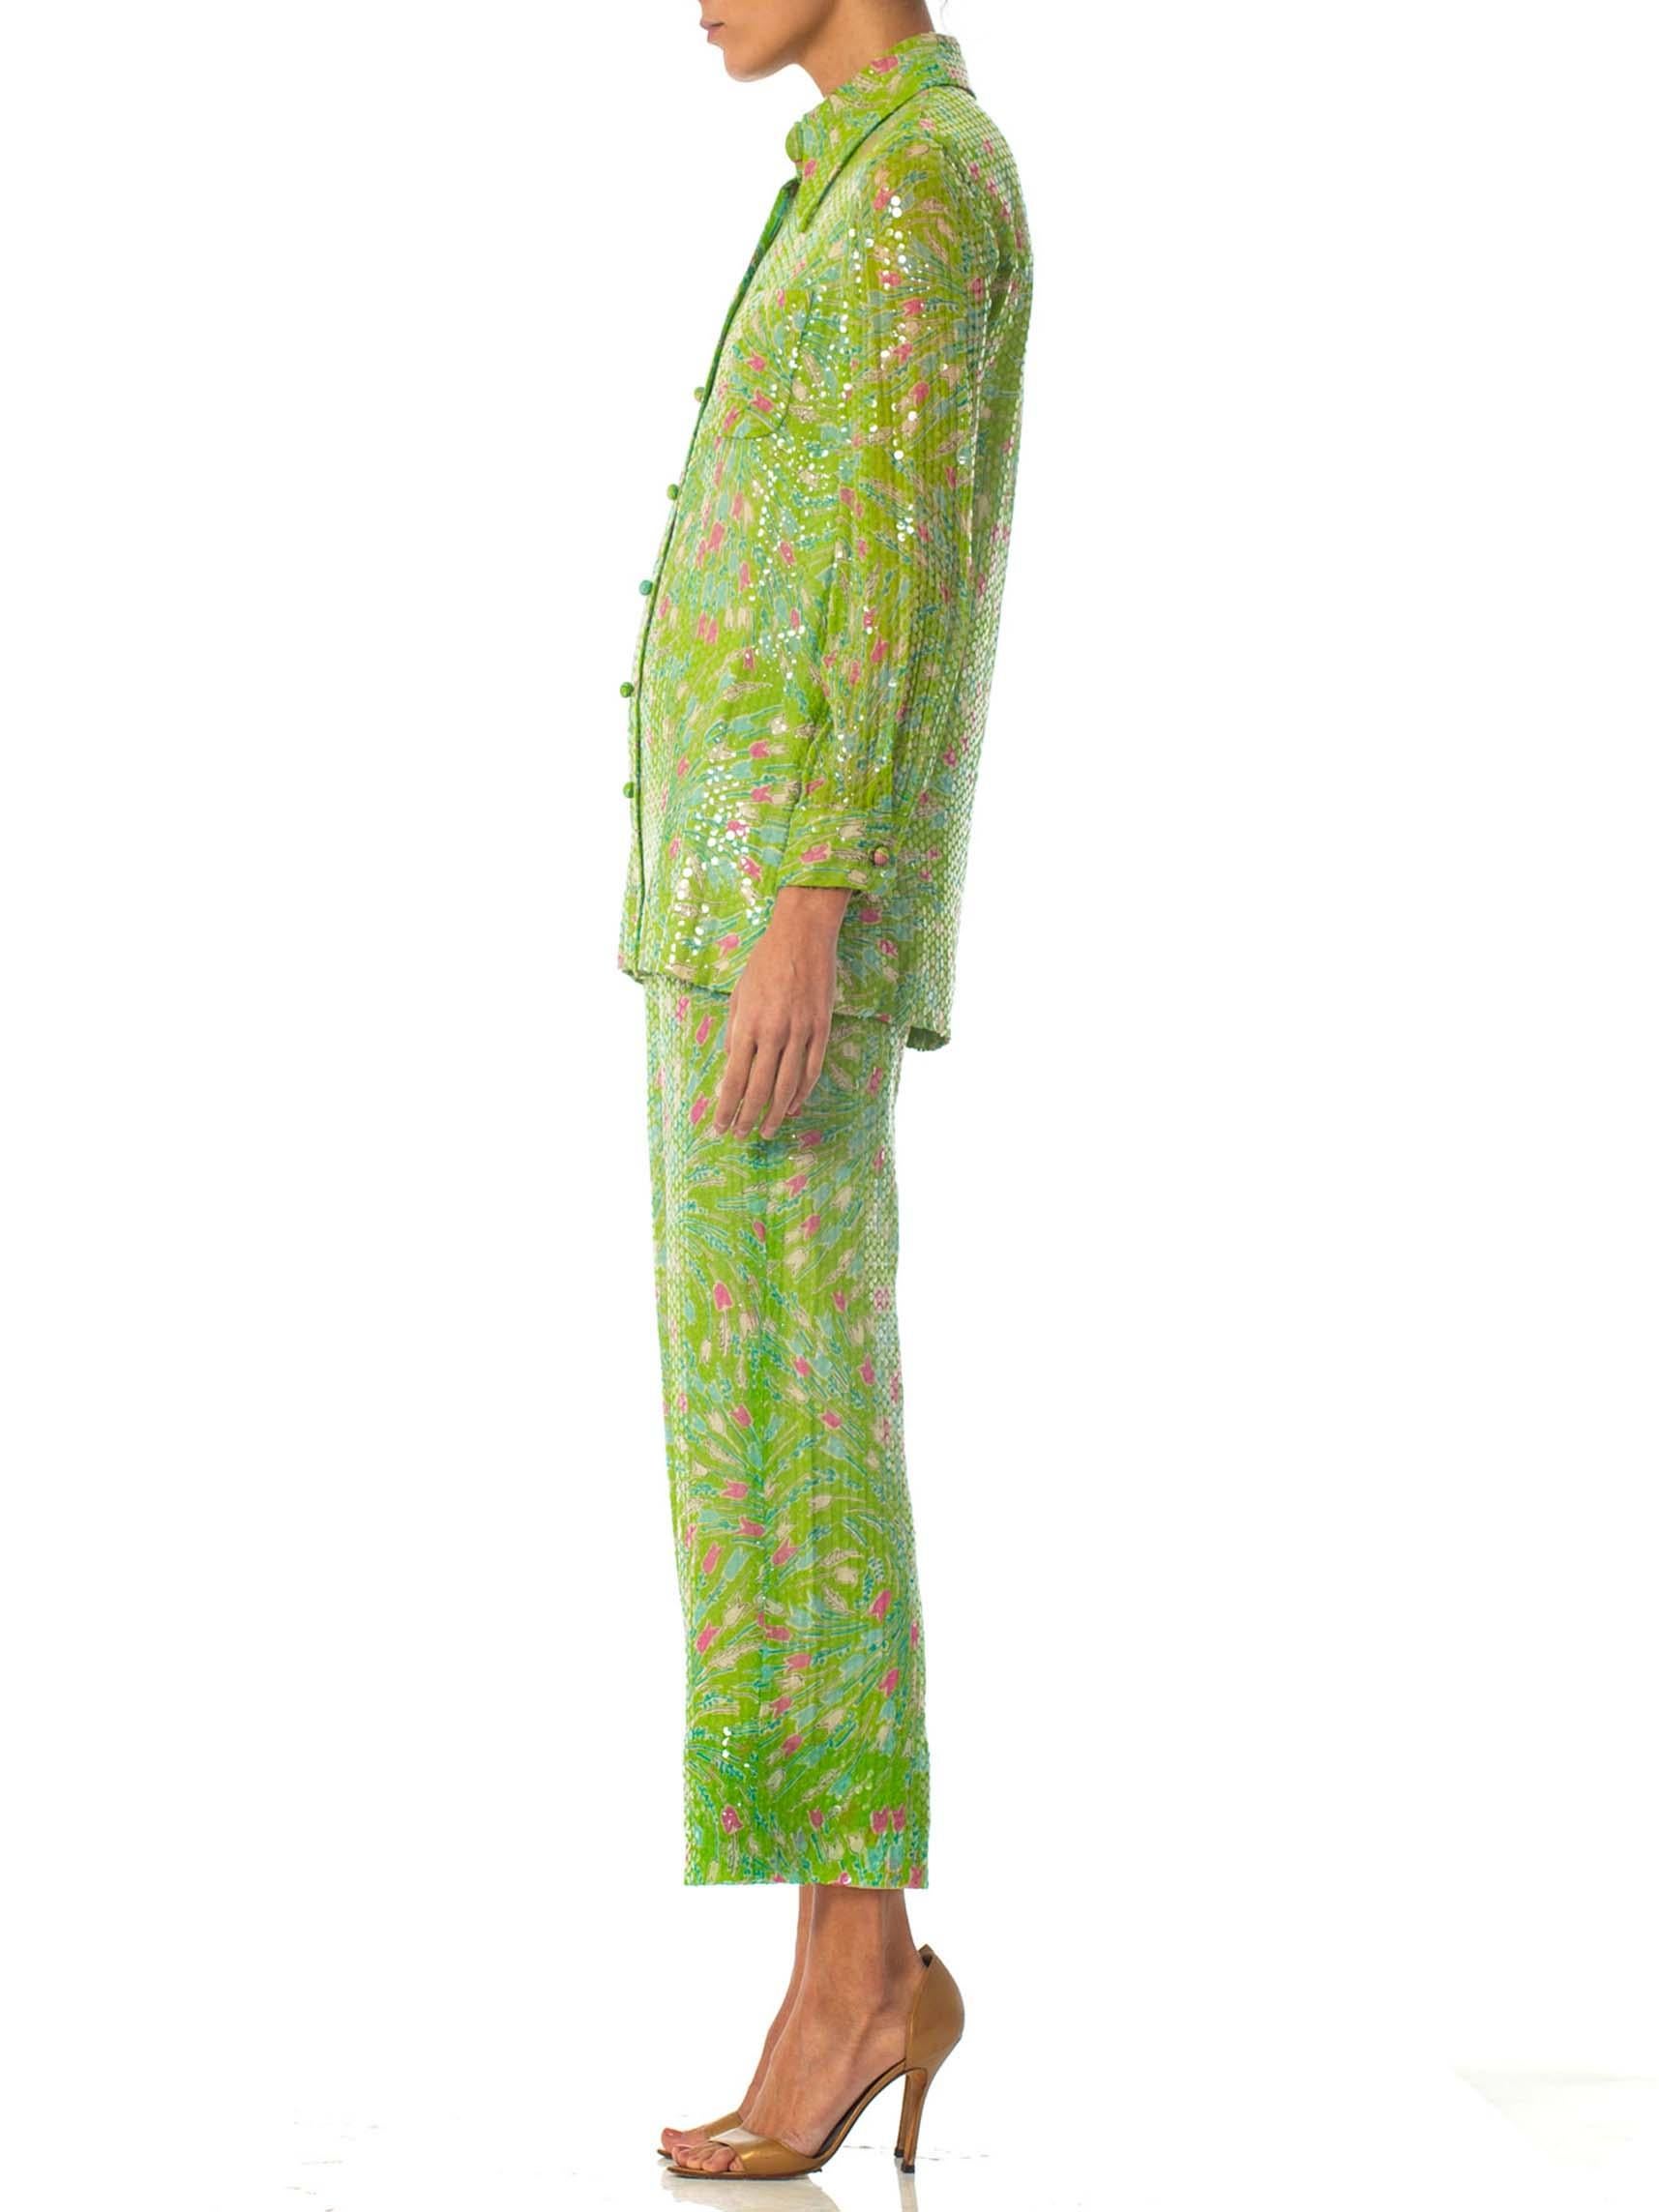 1970S Lime Green Sequined
Floral Shirt & Pant Ensemble